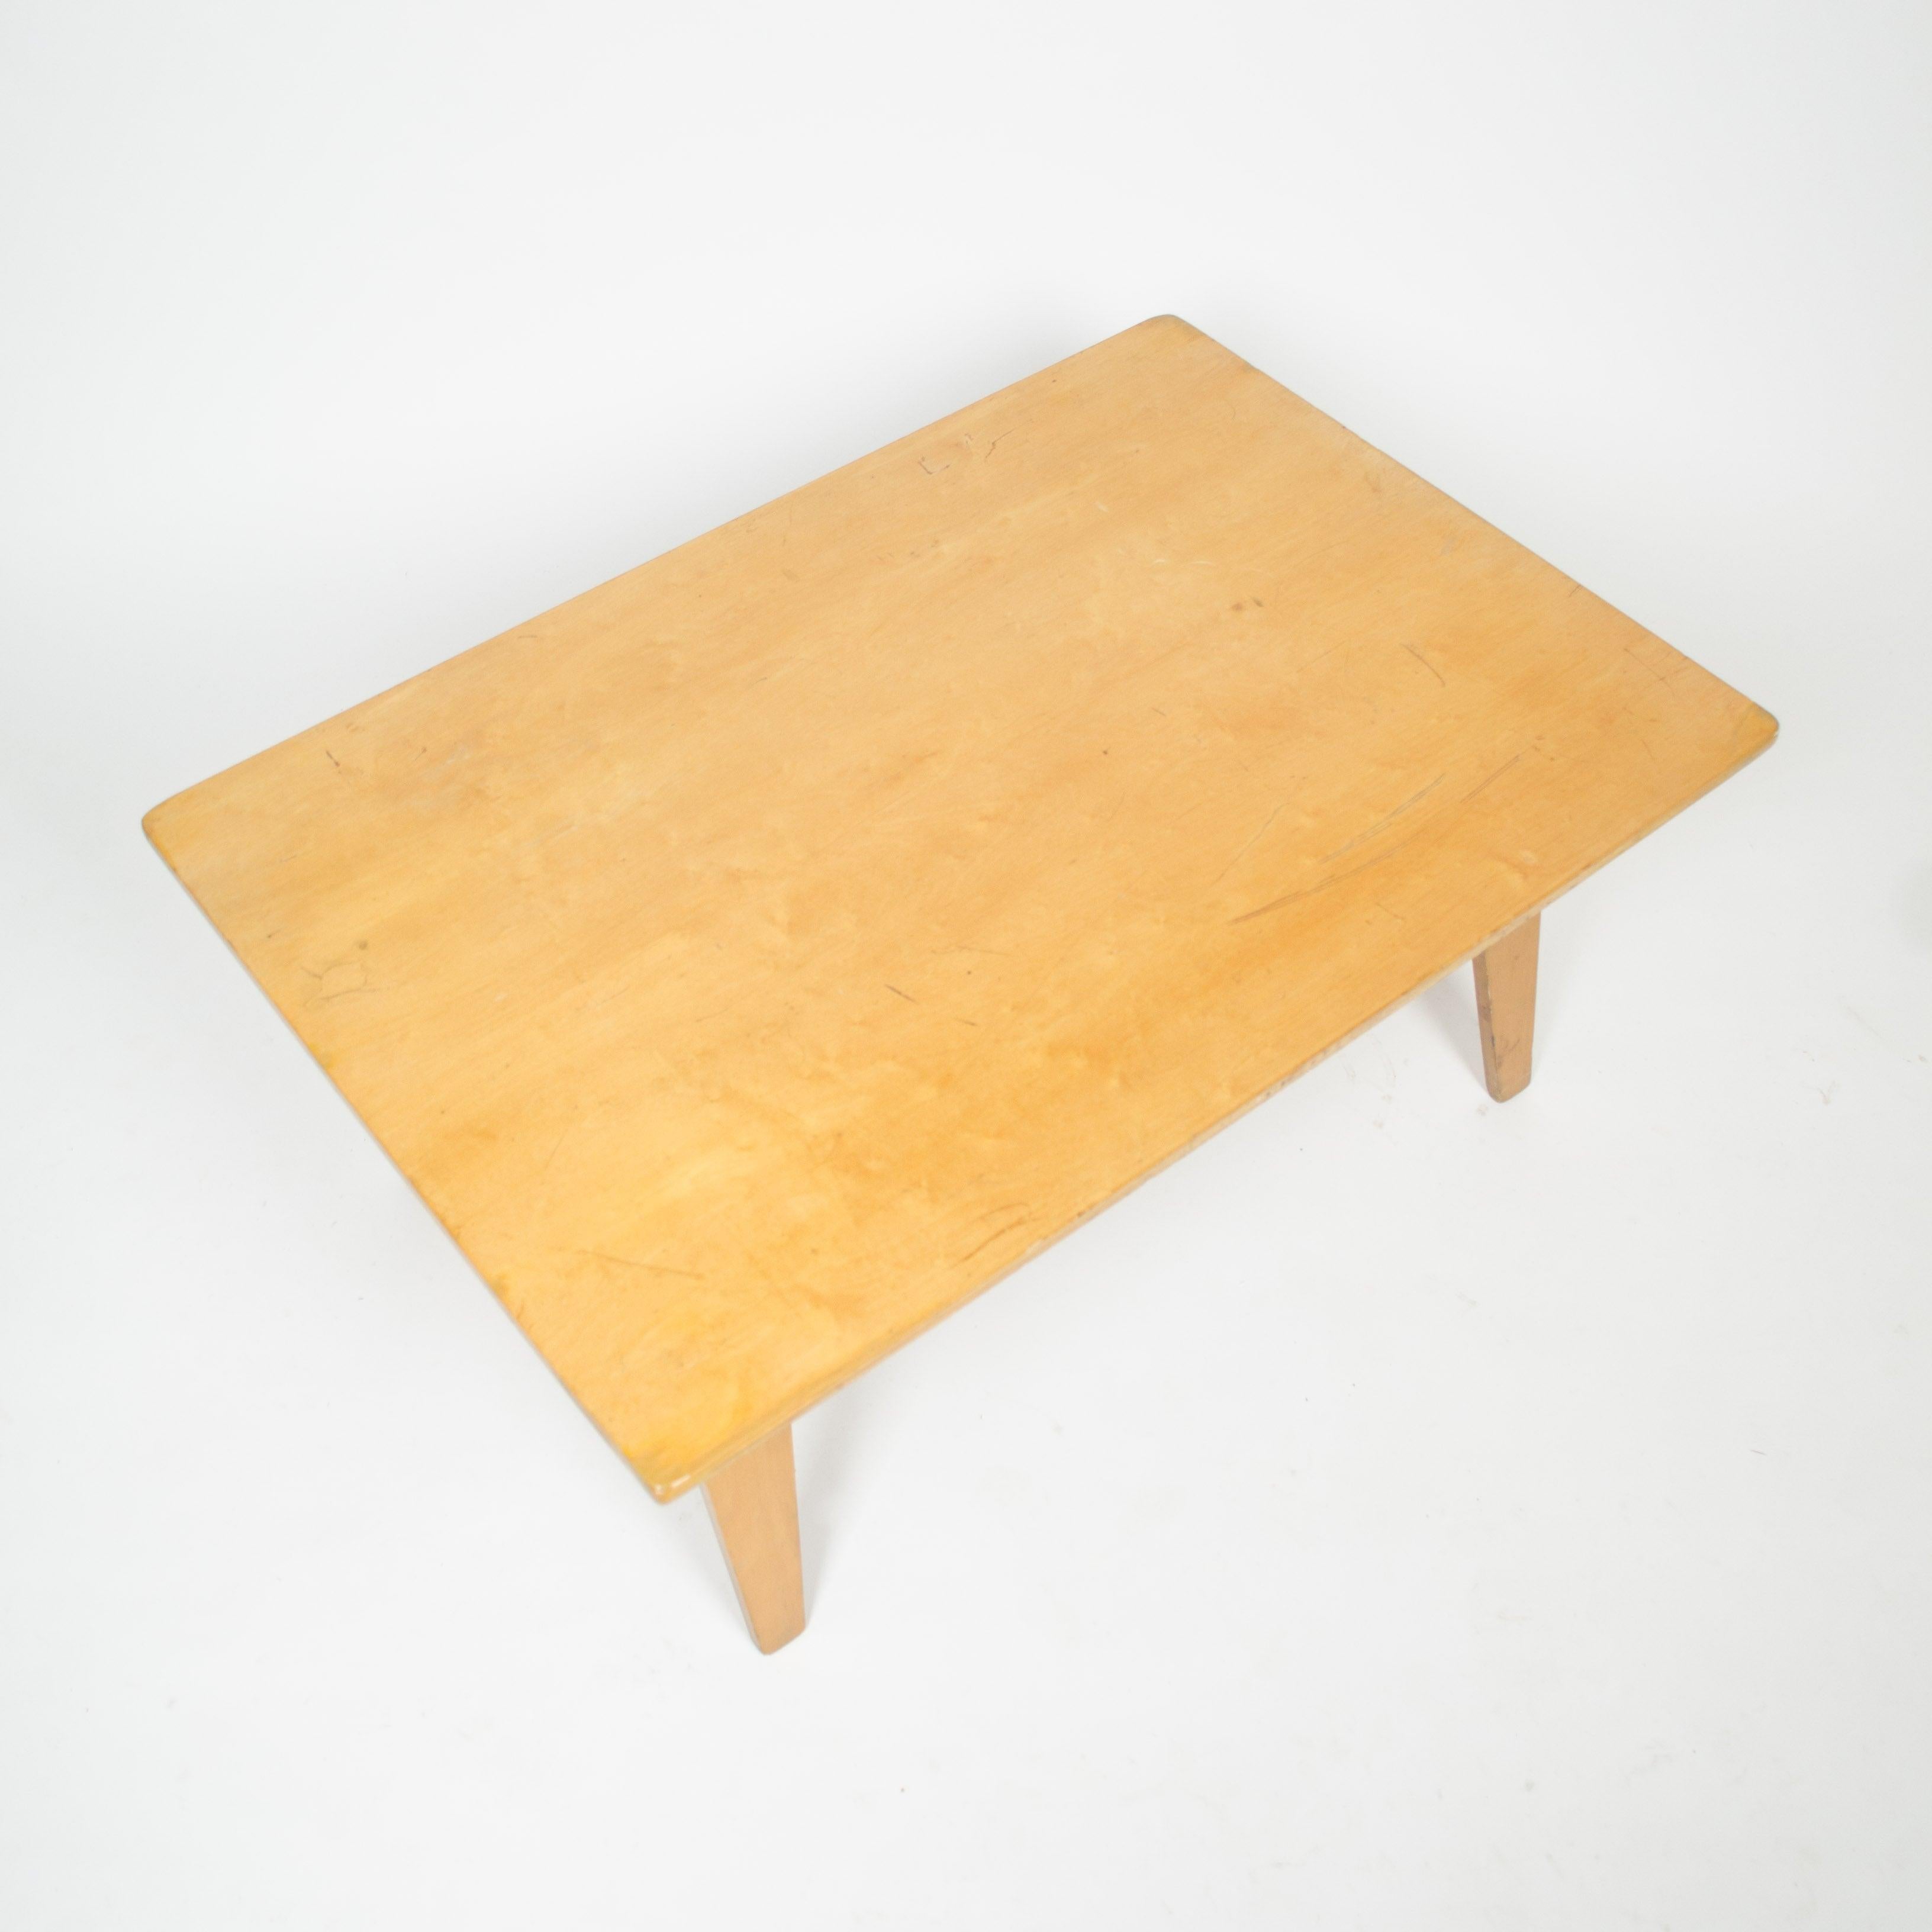 Eames Herman Miller Evans OTW 1946 Coffee Table Maple Cinema Prop In Good Condition For Sale In Philadelphia, PA